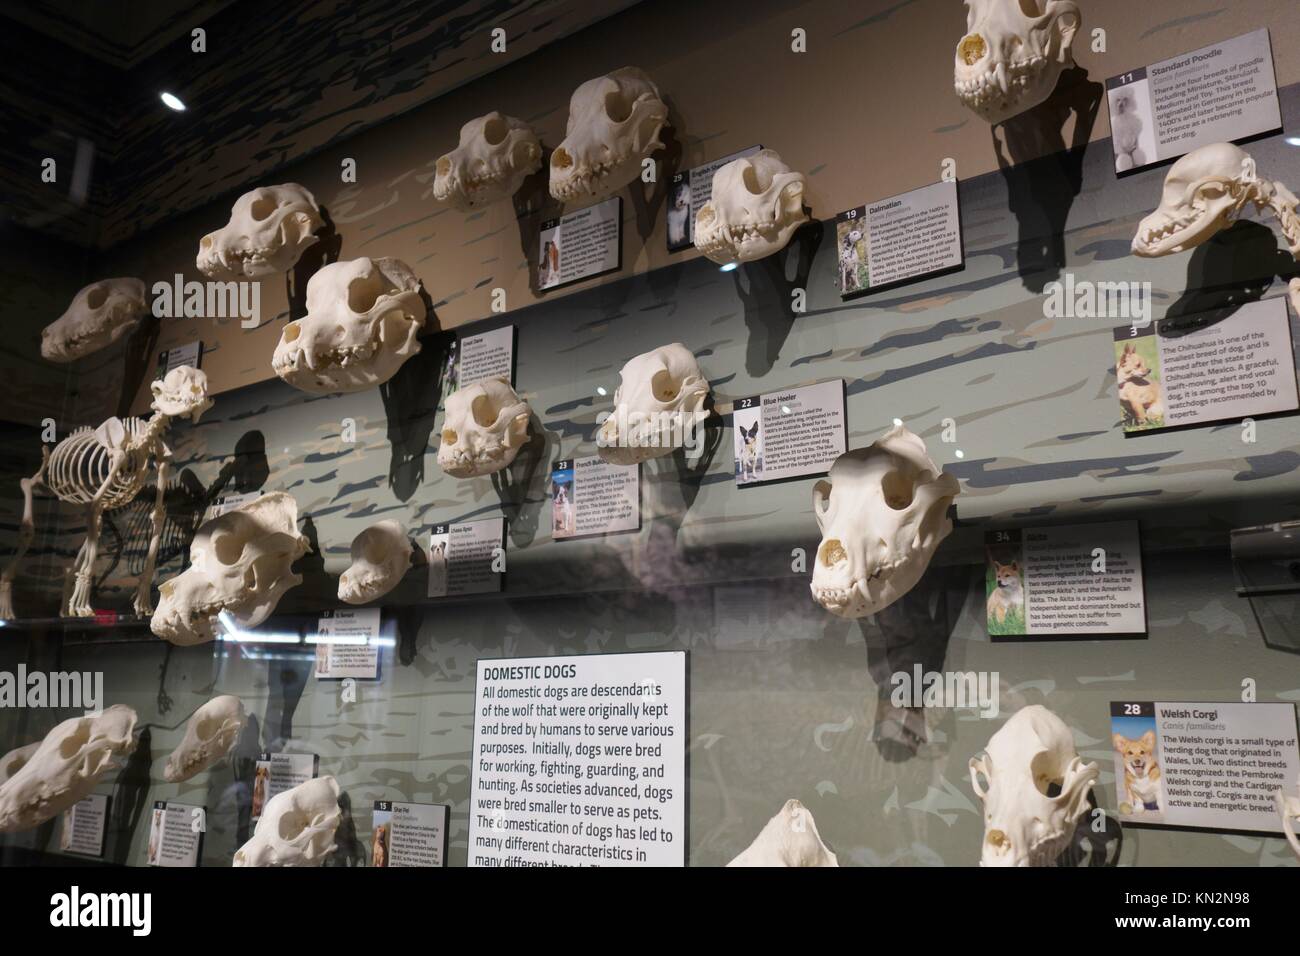 The skulls of different breeds of dogs on display at the Skeletons Museum of Osteology in Orlando, Florida, USA. Stock Photo